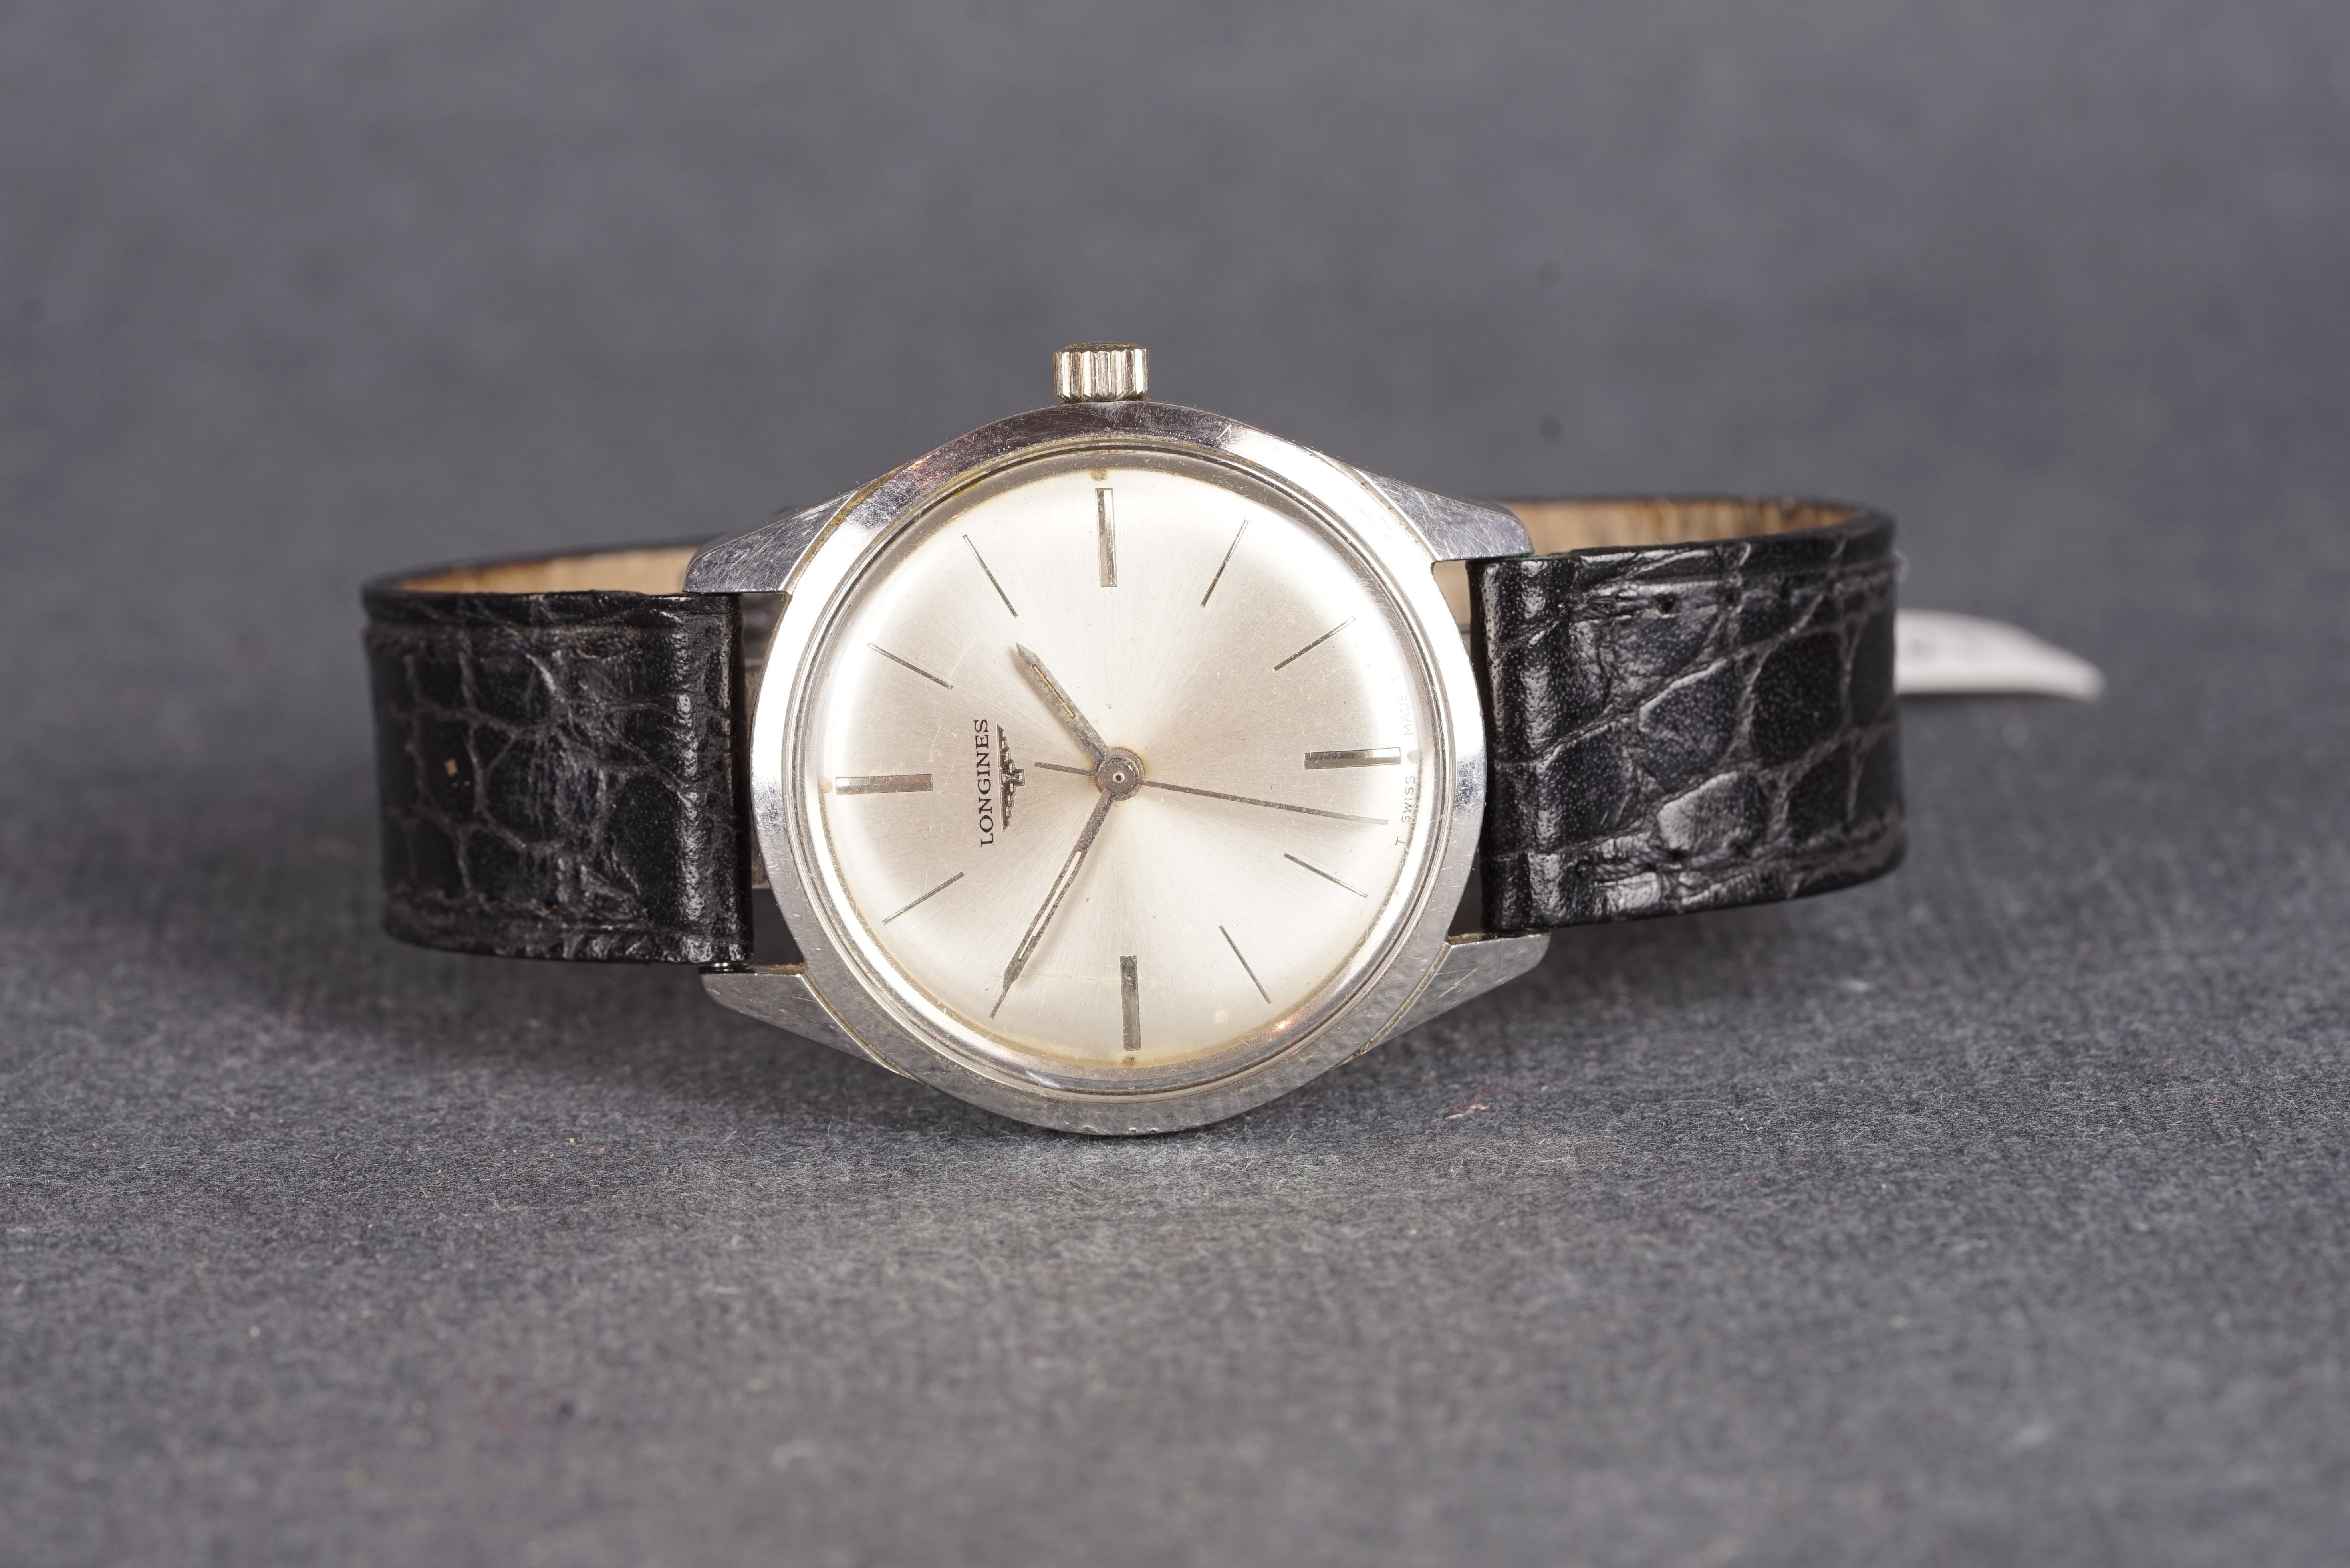 GENTLEMENS LONGINES WRISTWATCH REF. 7624, circular silver sunburst dial with etched hour markers and